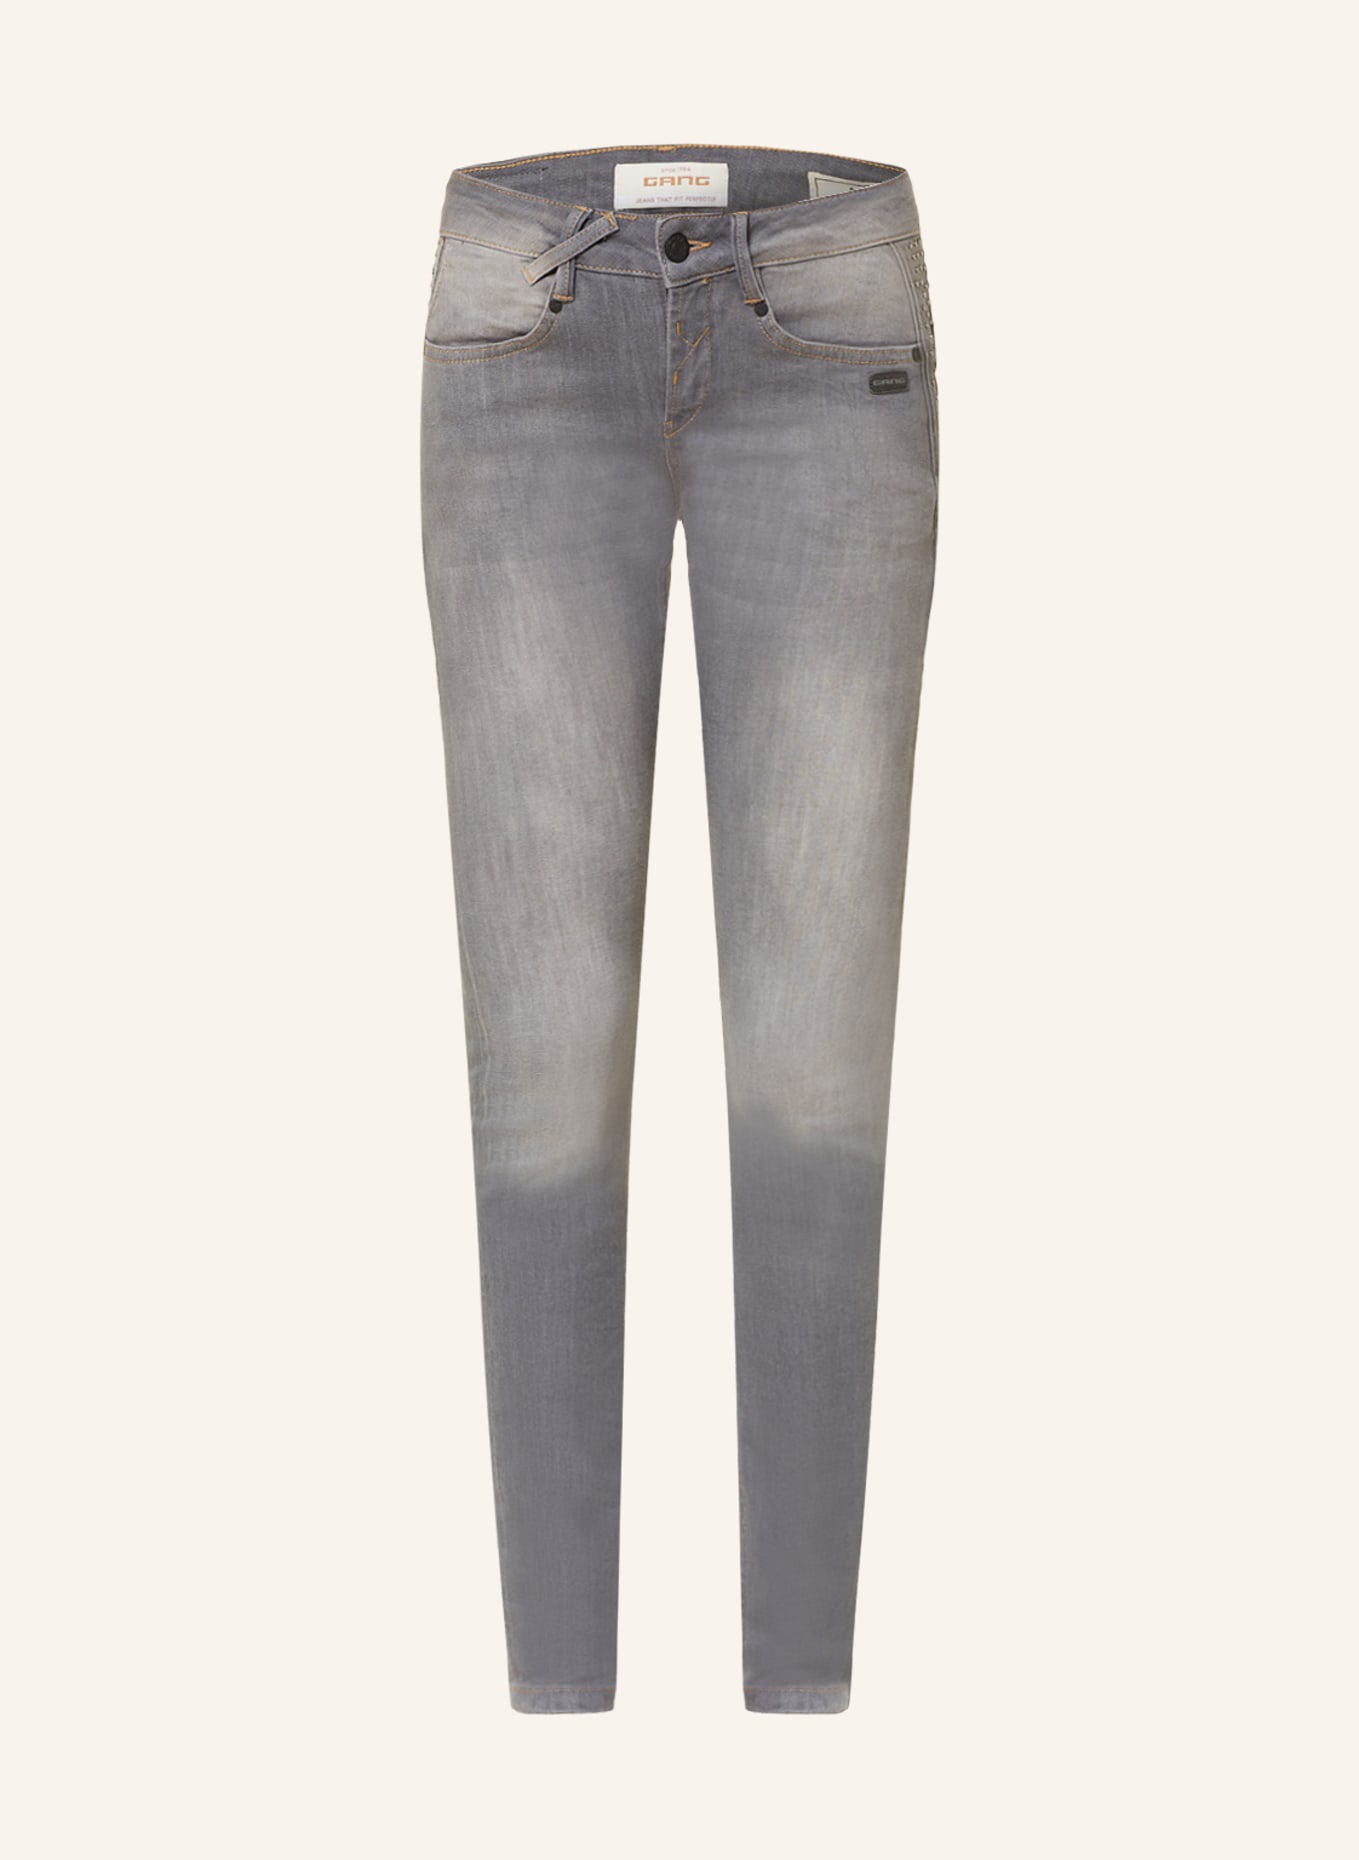 GANG Skinny Jeans NELE with decorative gems, Color: 7996 stared grey washed (Image 1)